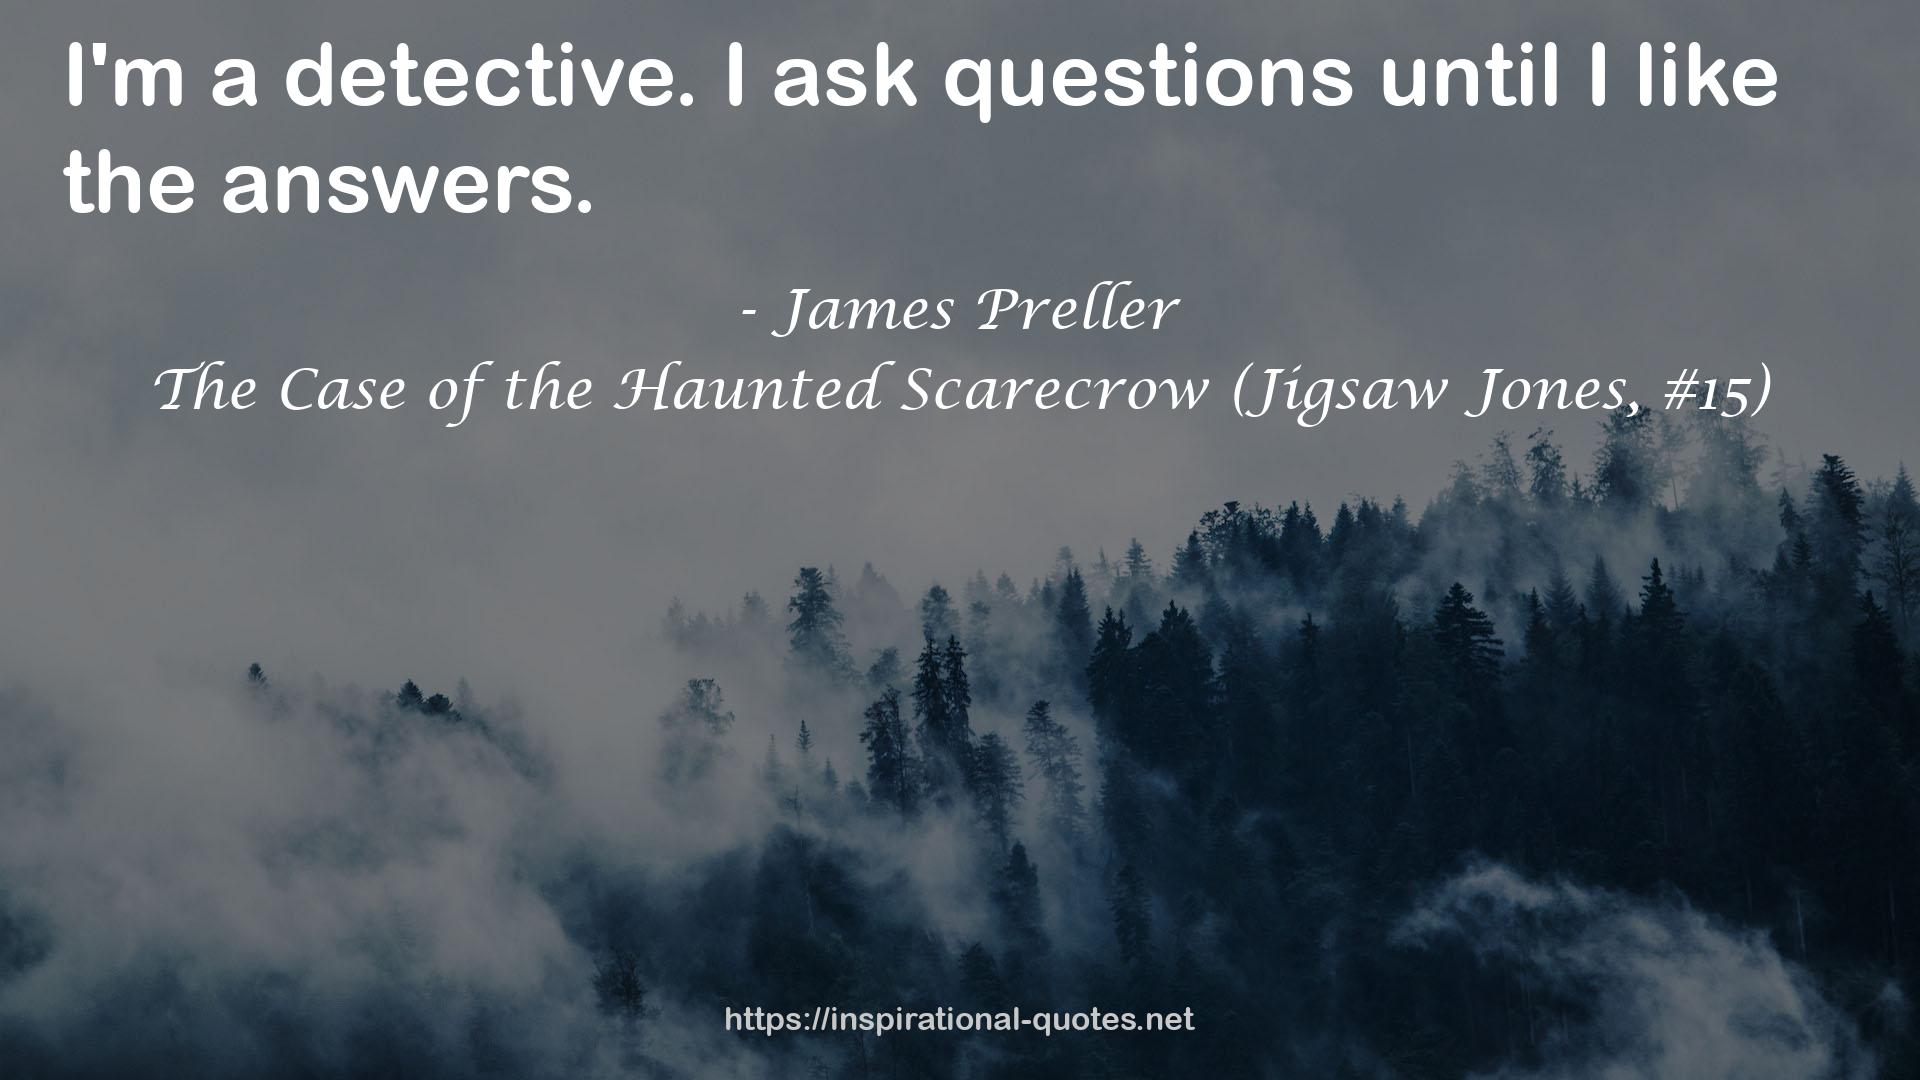 The Case of the Haunted Scarecrow (Jigsaw Jones, #15) QUOTES